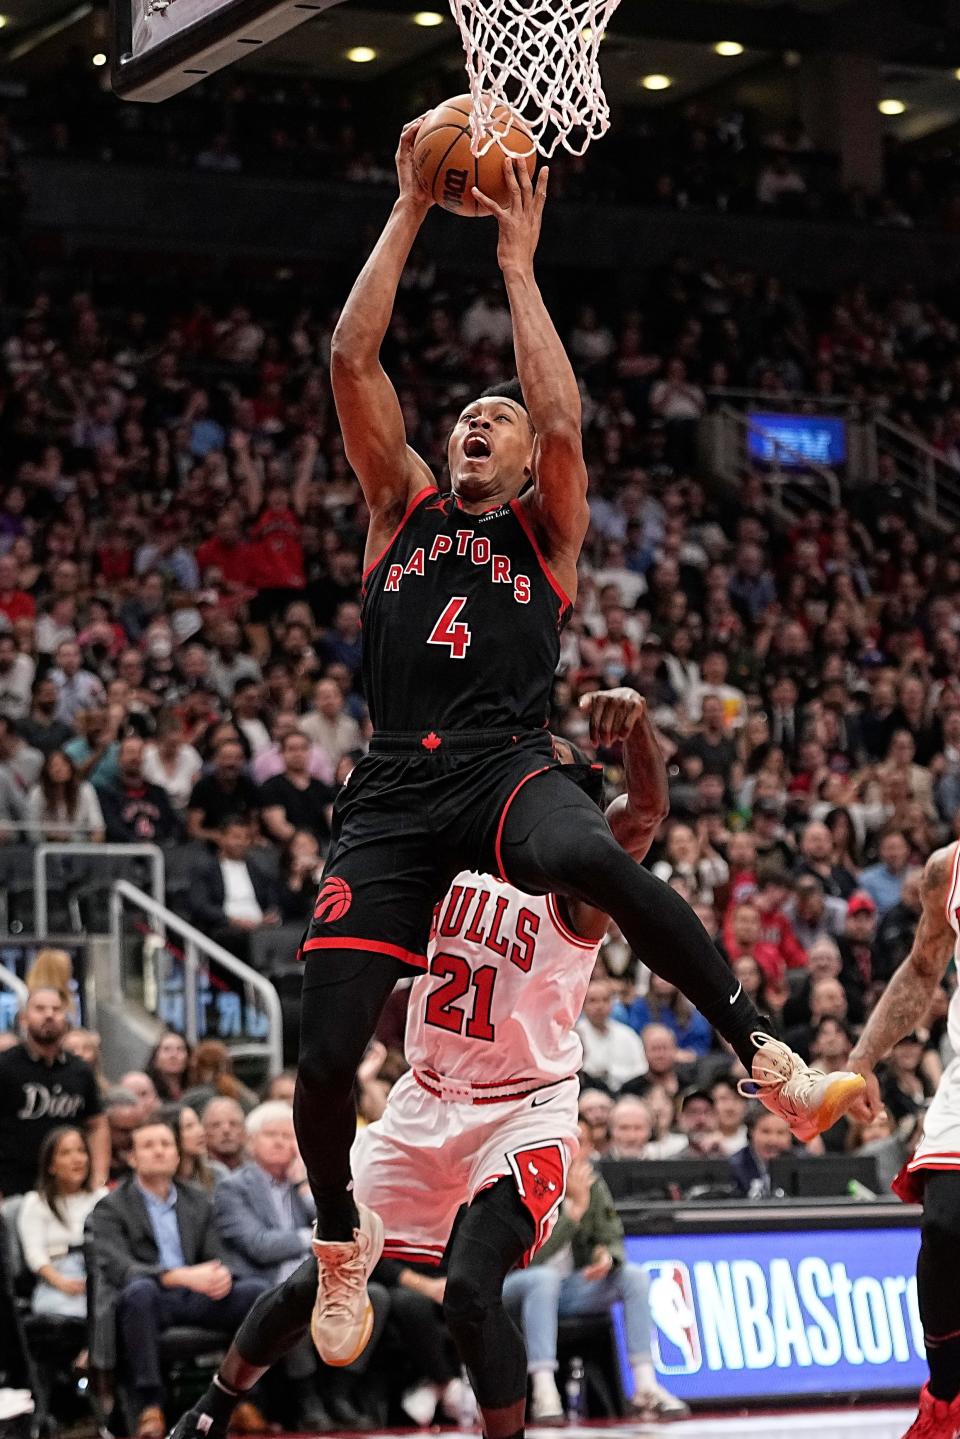 Toronto Raptors forward Scottie Barnes goes up to make a basket against the Chicago Bulls on April 12 during the second half of an NBA Play-In game at Toronto's Scotiabank Arena.